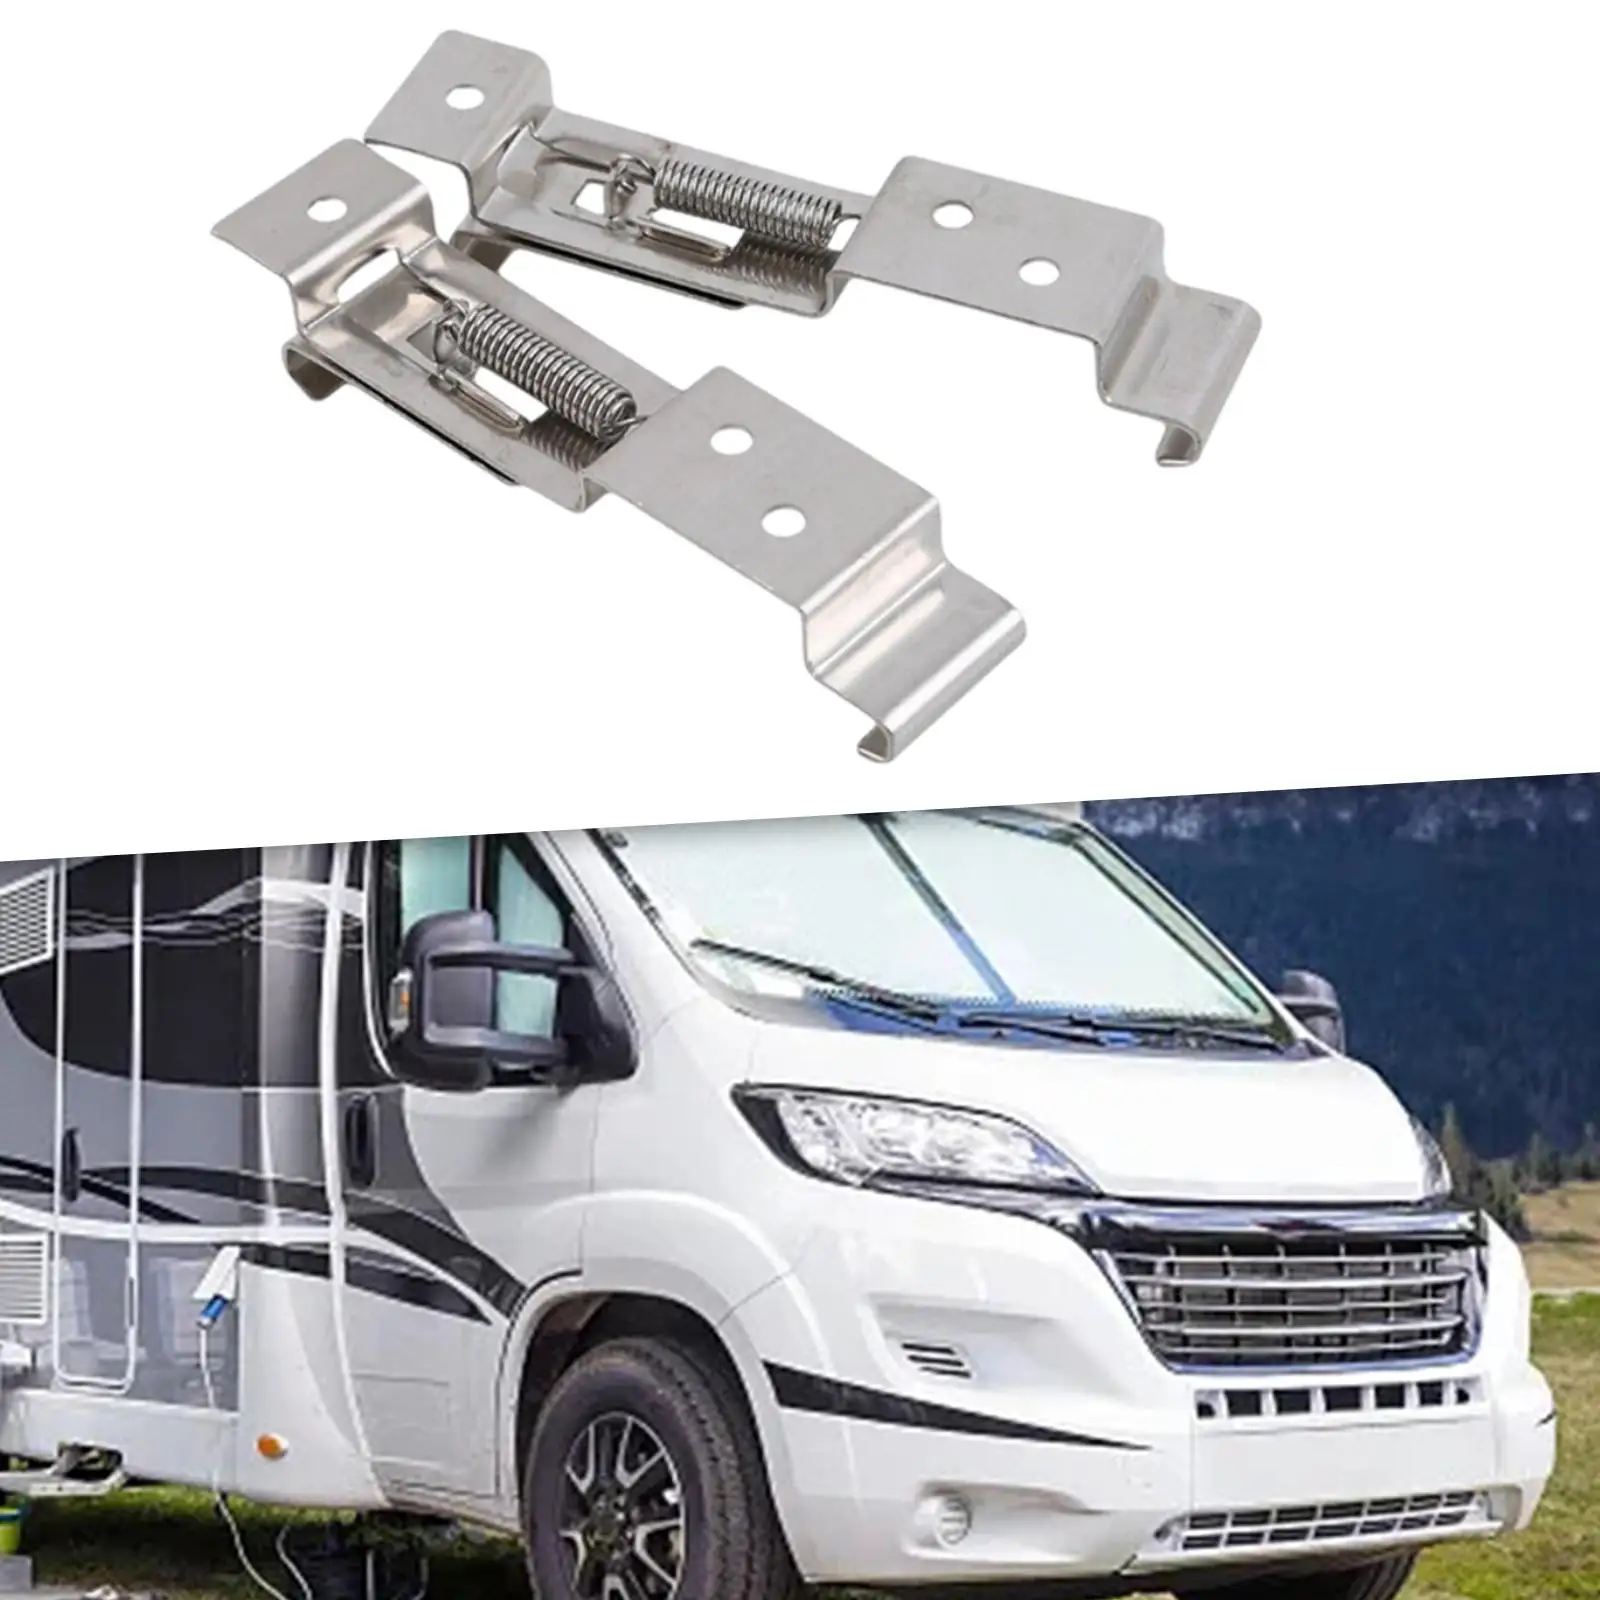 2 Pieces Cars License Plate Cover Auto Trailer Number Plate Clips for Trailer RV Professional Replacement Easy to Install